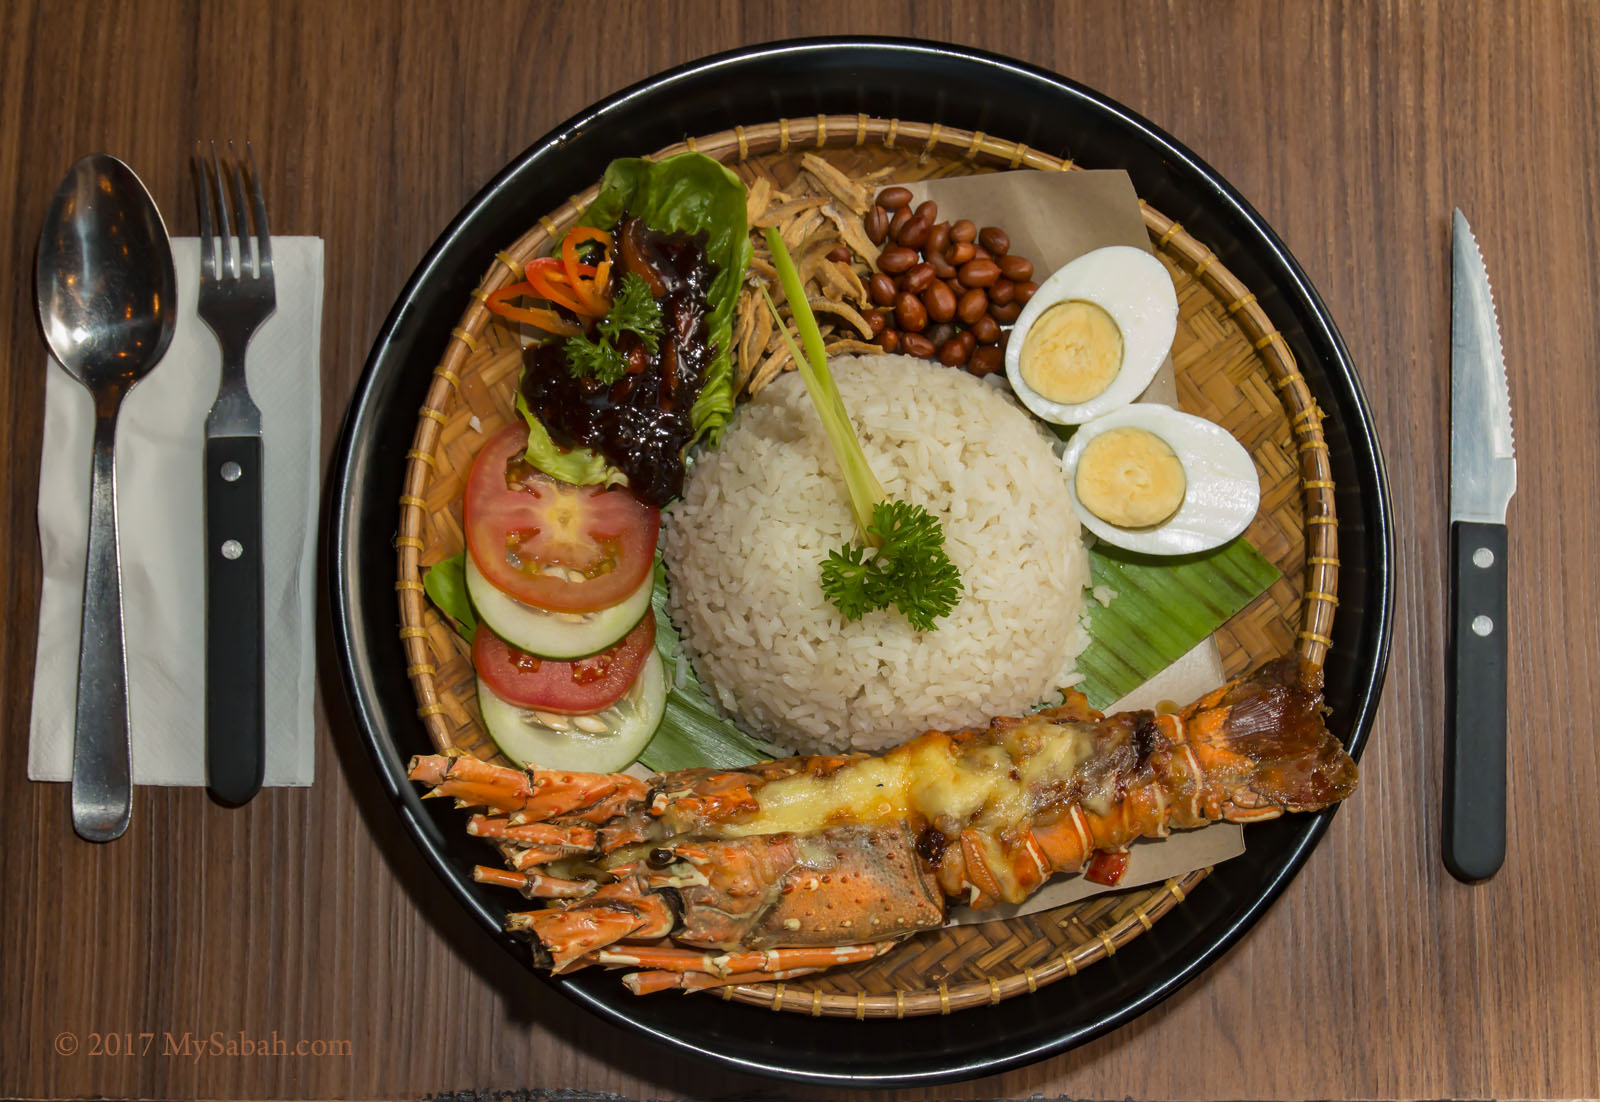 Lobster Nasi Lemak, First in Malaysia